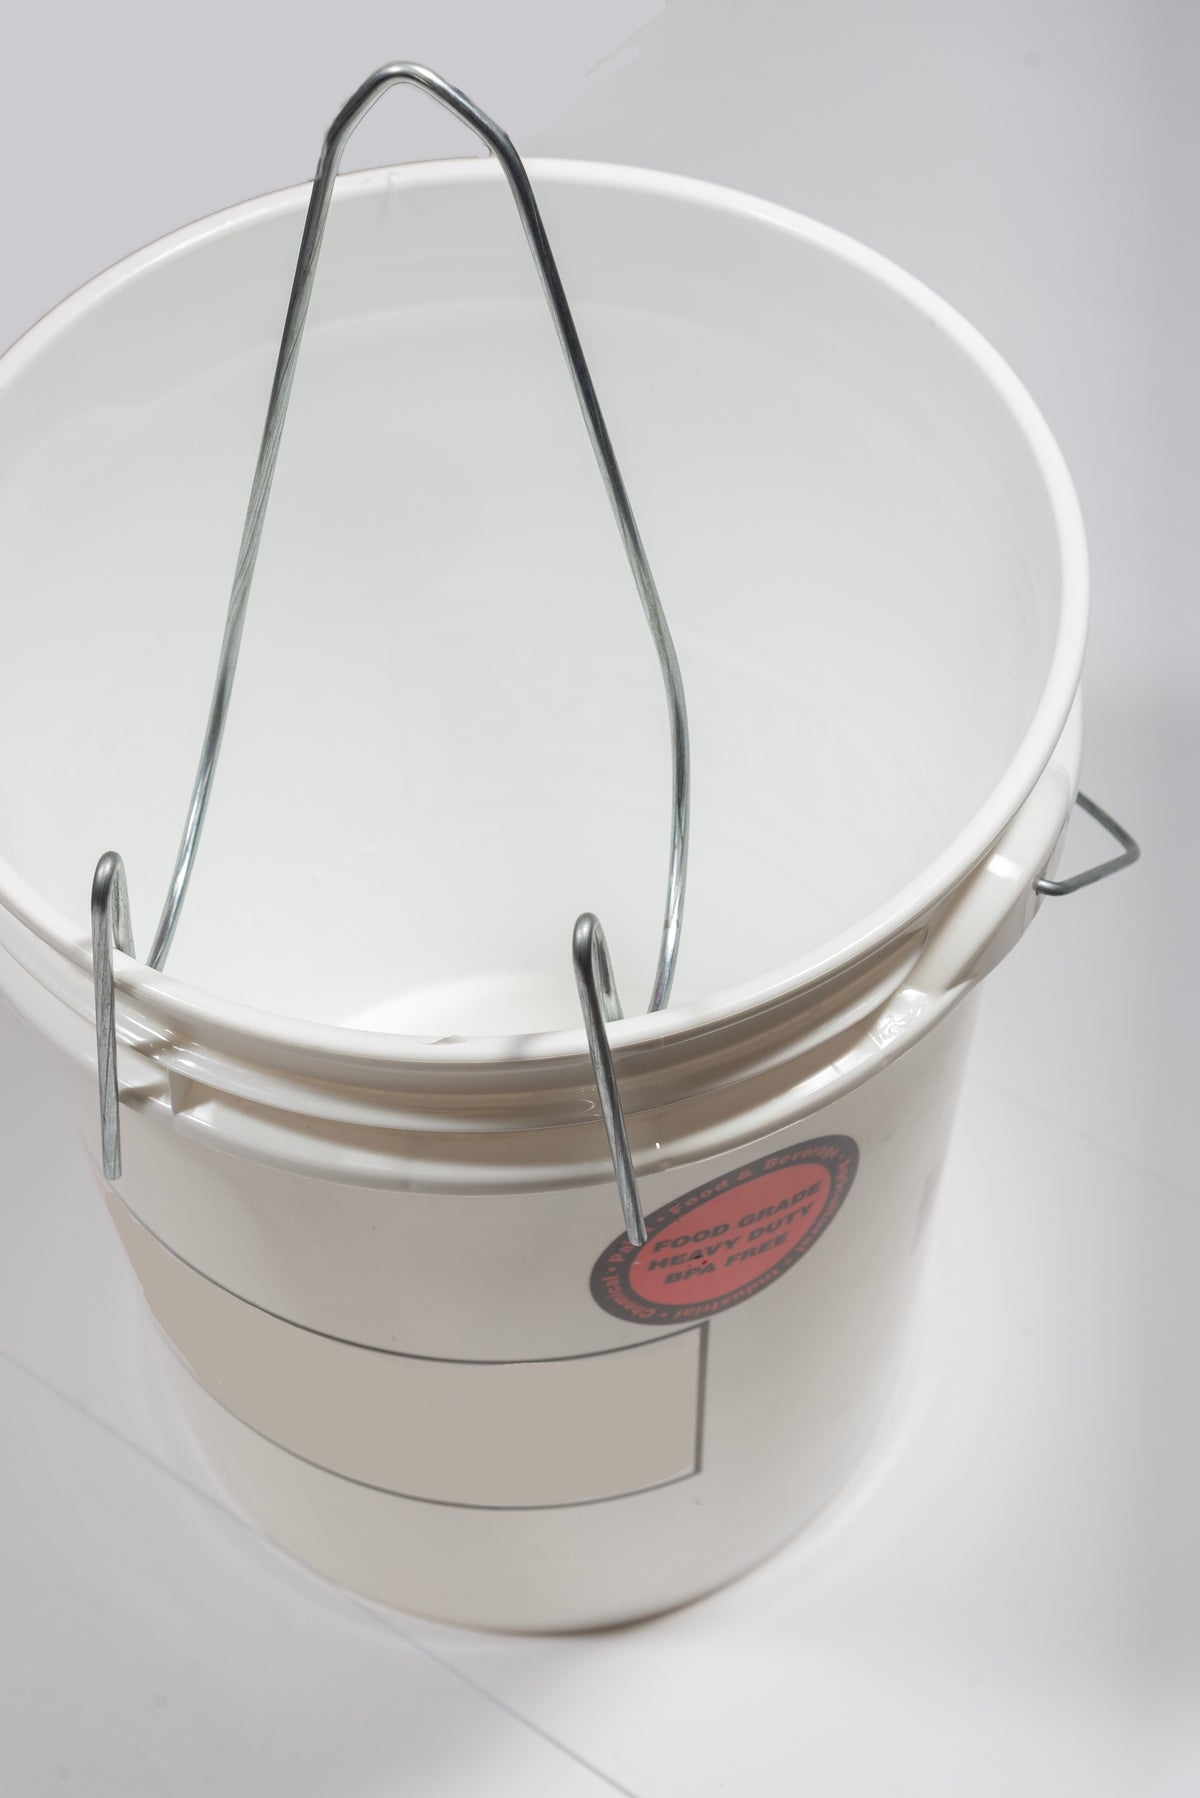 A white bucket attached with an unloader: long thick piece of metal bent in three places and rounded out made to hook onto the edge of a bucket.